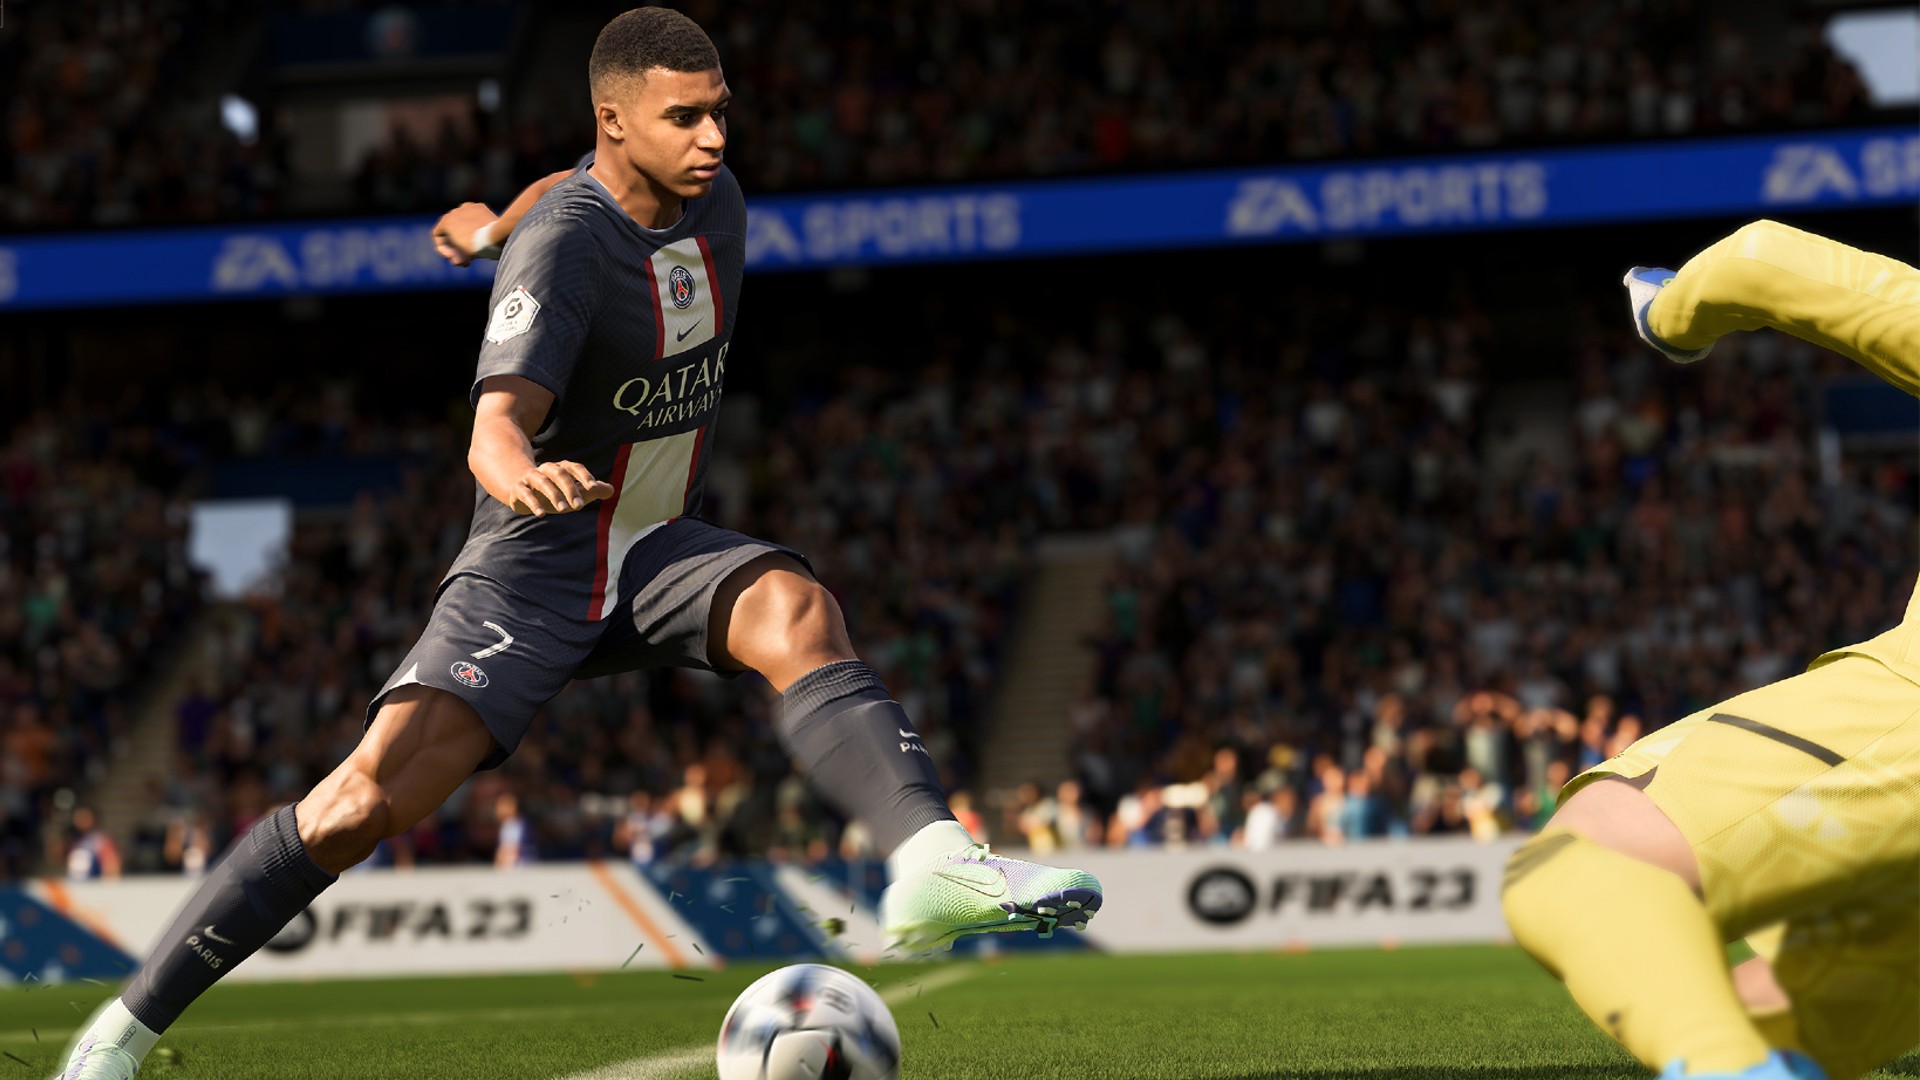 FIFA 23 ratings predictions and leaks